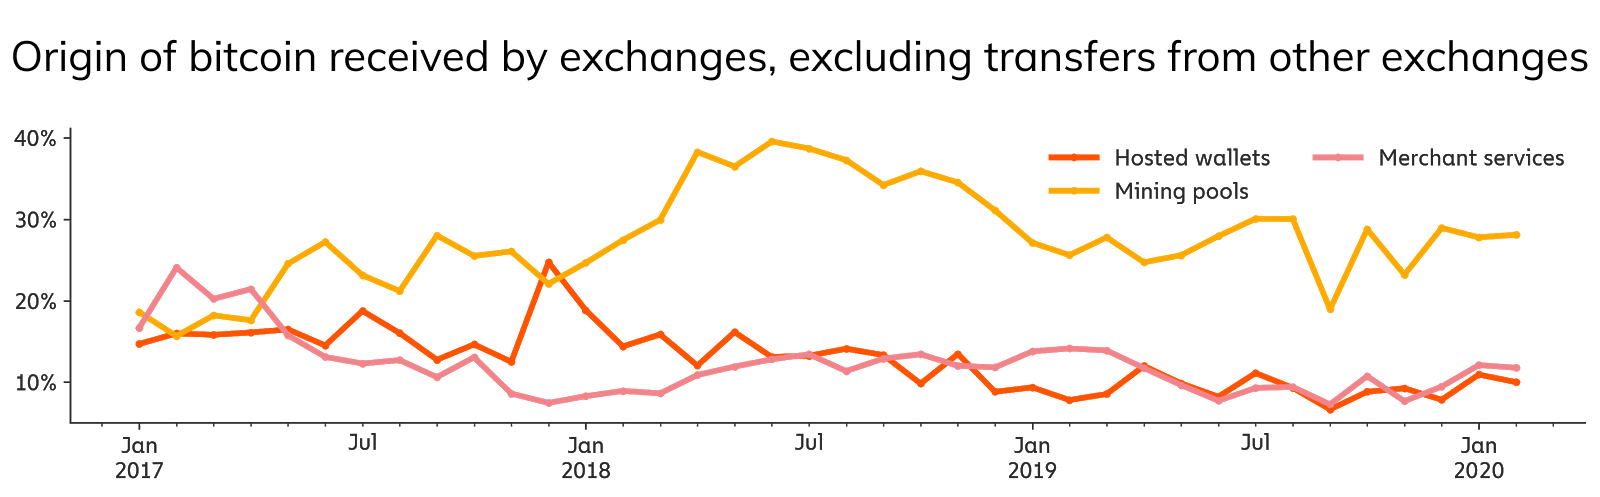 Origin of Bitcoin received by exchanges, excluding transfers from other exchanges. Source: Chainalysis